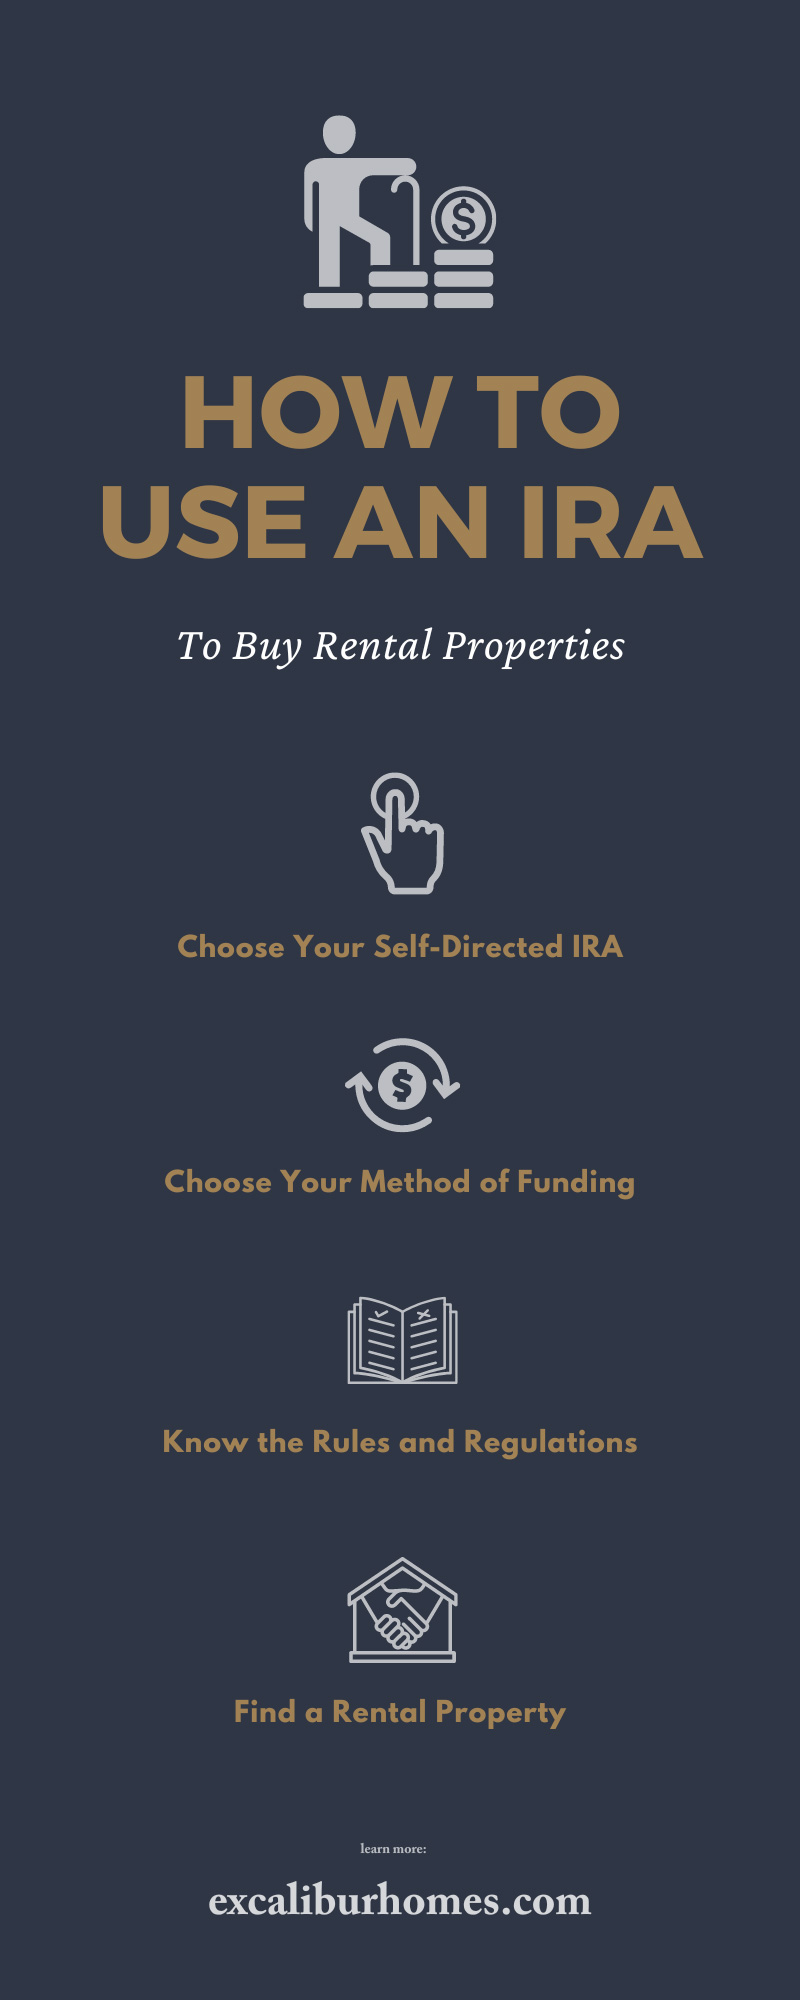 How To Use an IRA To Buy Rental Properties 